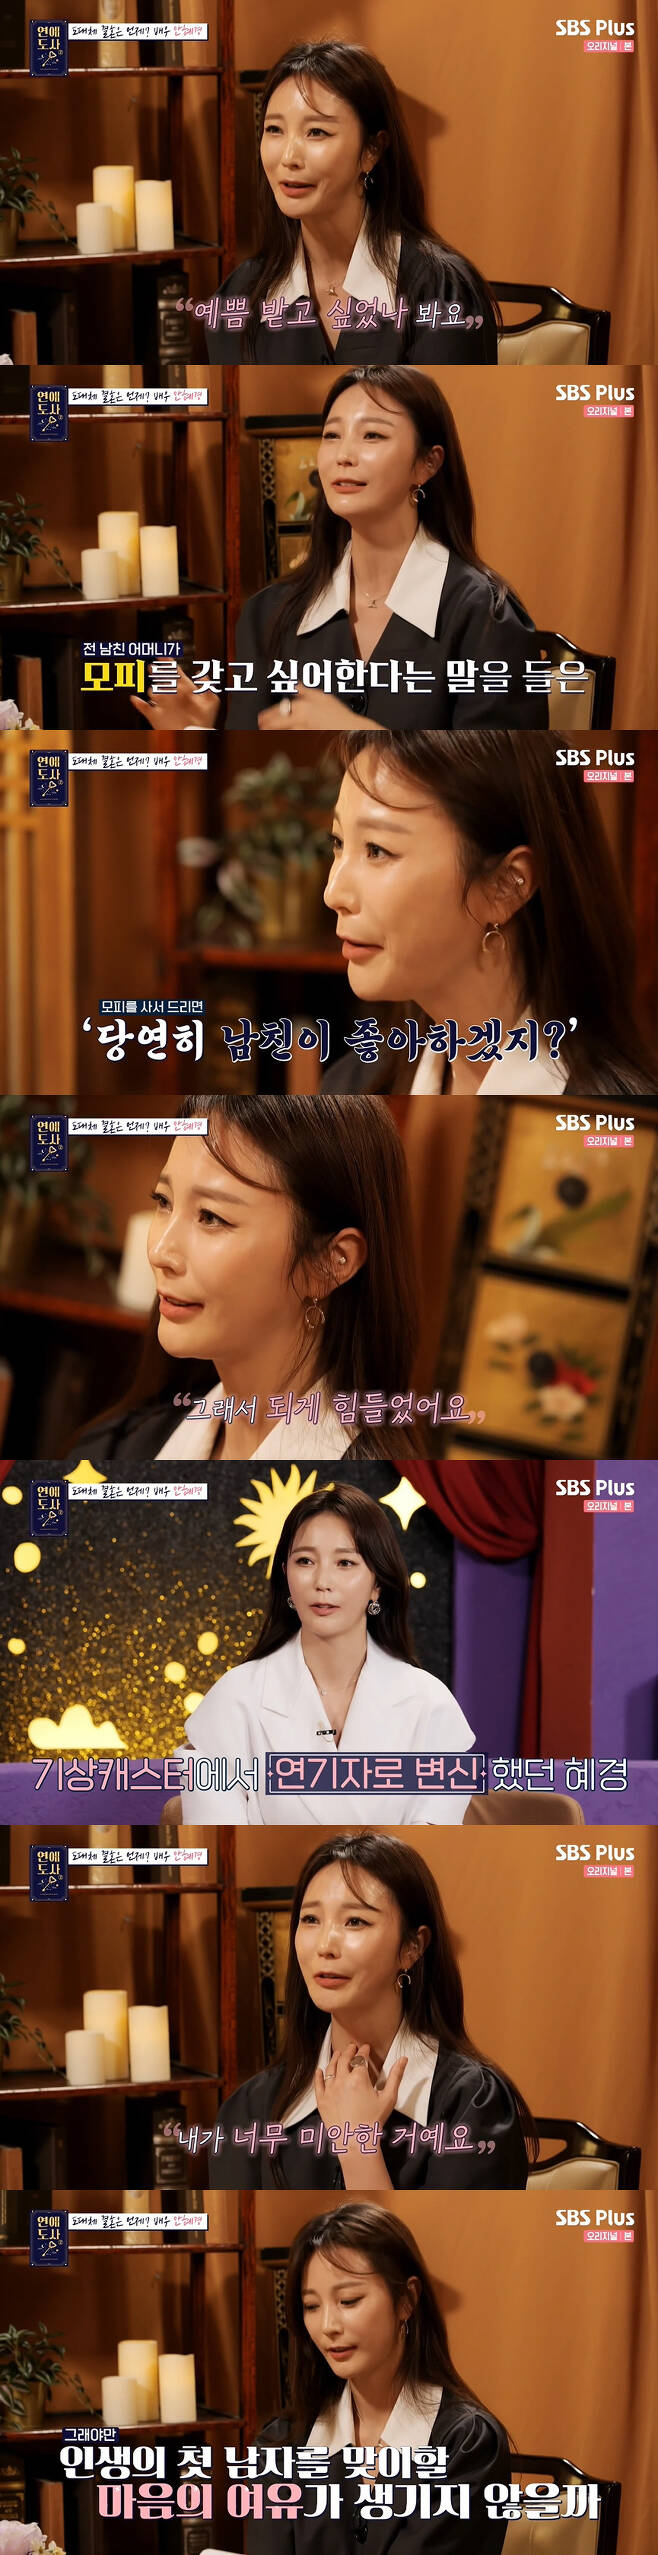 Love Dosa 2 Ahn Hye-Kyung has been honest about Our Love Story.On the 6th, SBS Plus, Channel S Love Lovers Season 2, Ahn Hye-Kyung appeared.Ahn Hye-Kyung, who visited the love-in-law on the day, said, I wonder how I can get married and wonder when I can get married.At the end of Ahn Hye-Kyung, who is 43 years old this year, Hong Hyun-hee said, I am a calm person, but I see impatience.Now, Chois aide Bae Da-hae announced his marriage, and Kim Young-hee married, and Ahn Hye-Kyung said, I did not know that they would go before me. So far, I think there are about six to seven times when I think about dating since I was in my 20s, said Ahn Hye-Kyung, whose last love affair was three years ago.It was a life-style, he said, surprised to find that he had even kissed with Thumbnam.3MC mentioned the topic of Thumbnail of Ahn Hye-Kyung, and Ahn Hye-Kyung said, It was really a contract love.Its a style of giving it all up for the Boy friend, Ahn Hye-Kyung said of her usual love tendencies.I saw him receiving a gift, but I was so happy that I liked it, so I thought I liked it because I liked it. I felt love, and the gift that I was getting bigger and the other person wanted me to grow. It was several times more expensive than limited luxury goods and income.I wanted to love me more and love me if I did it. Ahn Hye-Kyung said, I met in my early thirties and said that I did not have a blessing for men and that I would marry really late.I said I would marry if I was over 40 years old, but I want to ask again about how it is this year. Ahn Hye-Kyung, who met with Saju Dosa, asked, Did you do well not marry yet? And Saju Dosa said, I did very well.Ahn Hye-Kyung is a master who will not be strange even if he returns twice. It is not until next year that there will be some changes in love and life, he said. It is the first man of Ahn Hye-Kyung who comes in from next year and 47 years old.A man who can marry and settle in comes in, he explained.The man who comes in this year is a man who makes or eats the life of Ahn Hye-Kyung, he said firmly, shocking Ahn Hye-Kyung.I have a lot of sympathy for a man who is a hat, and I have a heart that is not enough to get to the situation where I pour out everything and get tired and eaten by myself, said Saju Dosa.When Ahn Hye-Kyung heard this, he said, I liked to give it. He recalled what he had never received a birthday present from a former Boy friend.It was a love that I was all in and out when I was in love. I wanted to be pretty and loved.In particular, Ahn Hye-Kyung was surprised to find that he had bought fur that his former Boy friend mother wanted to have in order to be loved by his former Boy friend.Even at the time, Boyfriend was shocked by the fact that he did not like the gift of Ahn Hye-Kyung.About her favorite style, Ahn Hye-Kyung said: I like a person who is bright and loved and raised, and I think that person can give happiness.I have been living away from my parents since high school, so I have a deep family relationship and I want to be born in a house with a smile. Ahn Hye-Kyung said: The first film since the freelance declaration was drama; I quit the weathercaster because I wanted to act, but it was different from what I thought.I thought I would start at the peak (because I had a recognition), but I really started again at 0, he said, adding that he started playing afterwards.He said, I am the oldest in the theater.I am the oldest, but if things do not work out, there is no audience, or something happens to the theater, I will try to carry it alone. I feel lonely even though I am all together. I am sorry that I do not have an audience because I do not know and I can not go well. I have asked my friends to come to Play and I have bought and distributed tickets myself.Even so, I felt that I wanted to fill the audience. I wanted to give energy and energy to my friends who performed. I hope that I will have a heart to love and share my baggage in my bowl, so that I can be a good heart to welcome the first man who can settle in a new life, he advised Ahn Hye-Kyung, who is responsible.